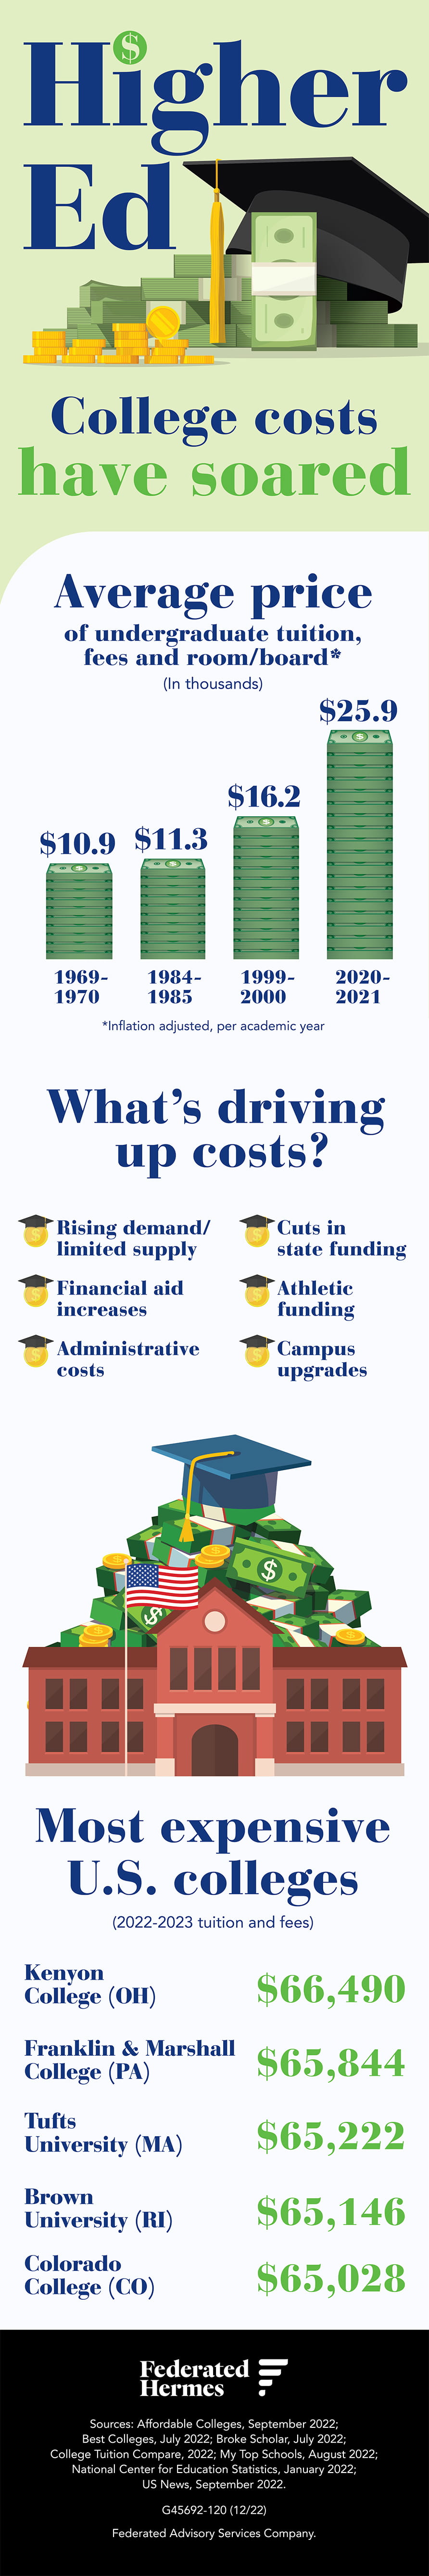 Higher Ed. College costs have soared. Average price of undergraduate tuition, fees and room/board in thousands of dollars, inflation adjusted per academic year. $10.9 in 1969-70, $11.3 in 1984-85, $16.2 in 1999-2000, $25.9 in 2020-21. What’s driving up costs? Rising demand/limited supply, financial aid increases, administrative costs, cuts in state funding, athletic funding and campus upgrades. Most expensive U.S. colleges. 2022-2023 tuition and fees. Kenyon College in Ohio $66,490, Franklin & Marshall College in Pennsylvania $65,844, Tufts University in Massachusetts $65,222, Brown University in Rhode Island, Colorado College in Colorado $65,028. Information sources: Affordable Colleges, September 2022; Best Colleges, July 2022; Broke Scholar, July 2022; College Tuition Compare, 2022; My Top Schools, August 2022; National Center for Education Statistics, January 2022; US News, September 2022. 